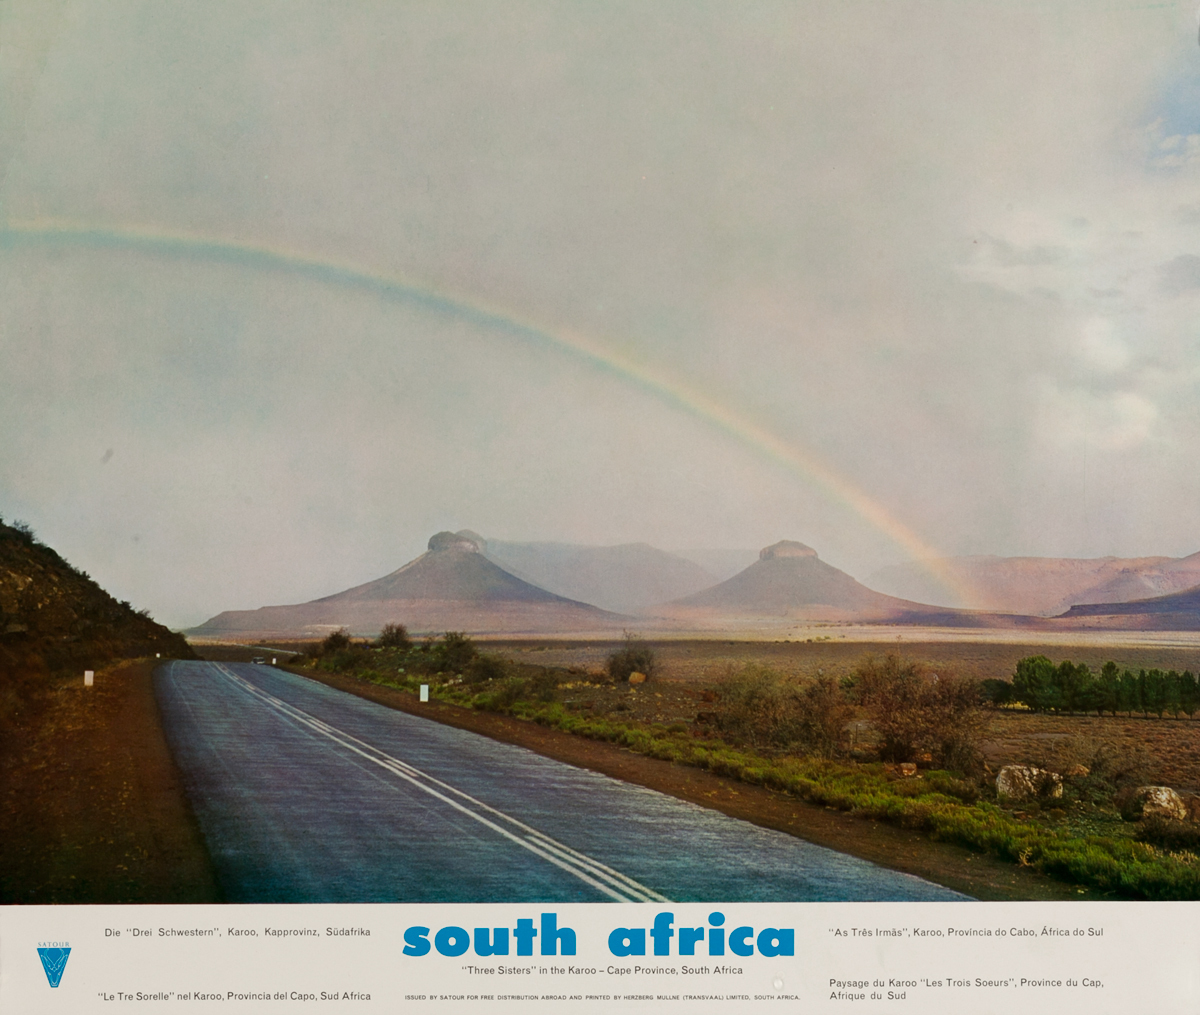 South Africa Three Sisters in the Karoo - Cape Province